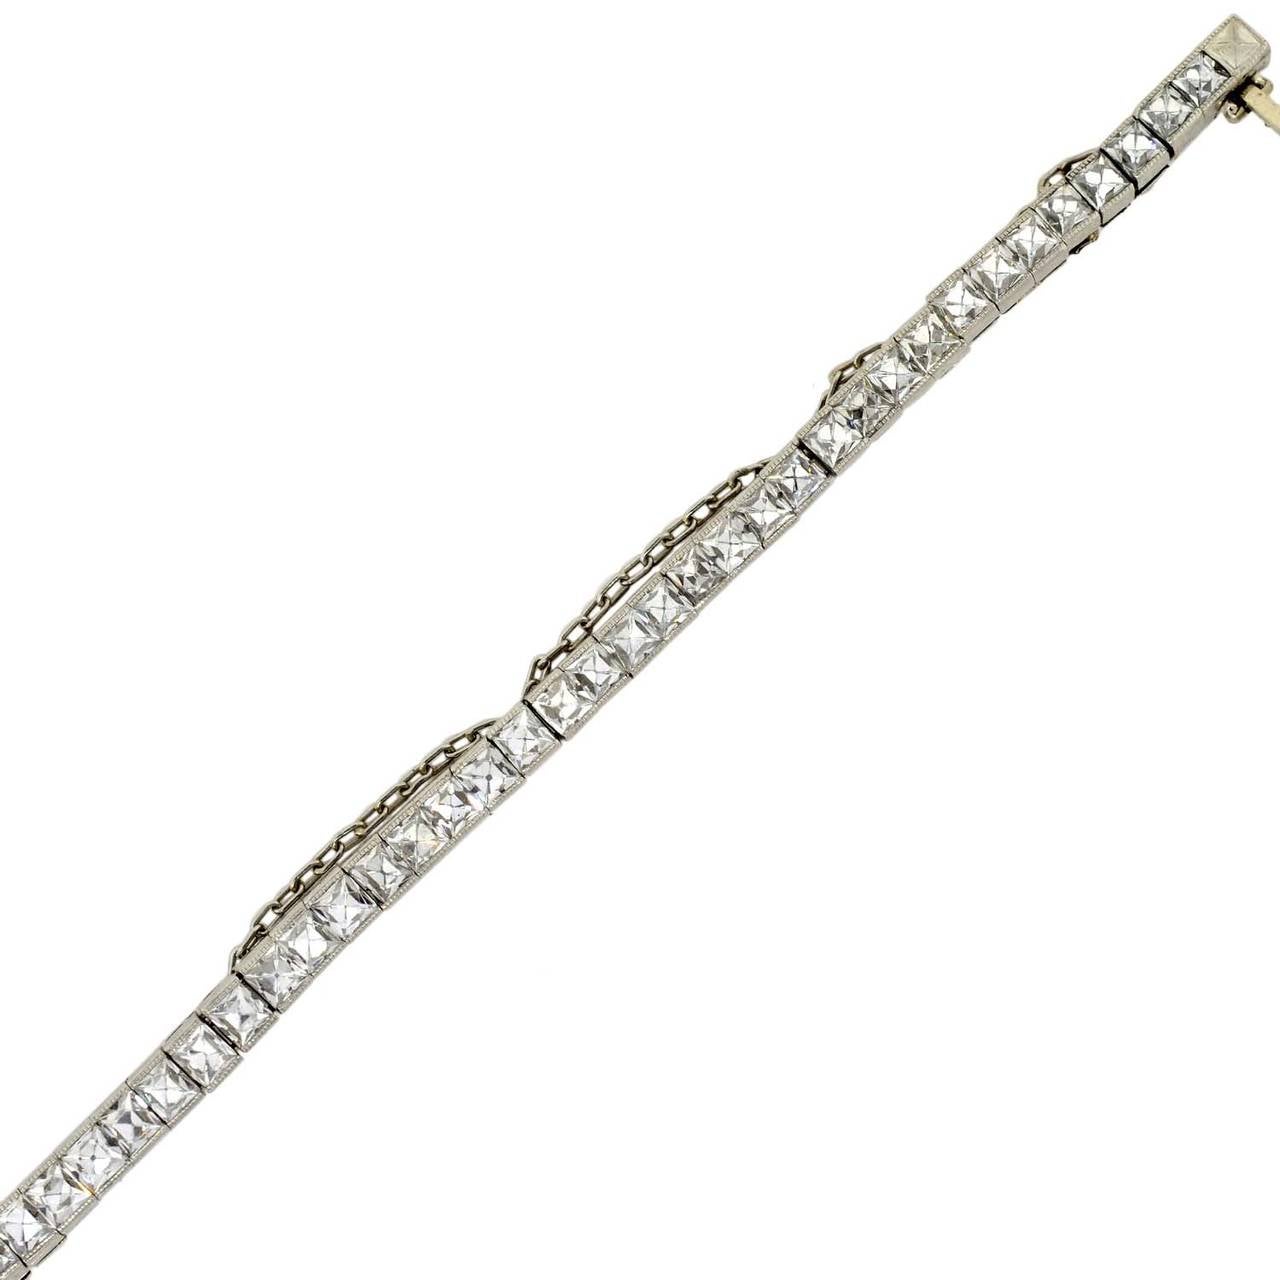 An absolutely stunning and unusual diamond line bracelet from the Art Deco (ca1920) era! Made of platinum, this gorgeous piece is comprised of 78 French Cut diamond links, which wrap around the entire length of the piece. Each faceted diamond stone